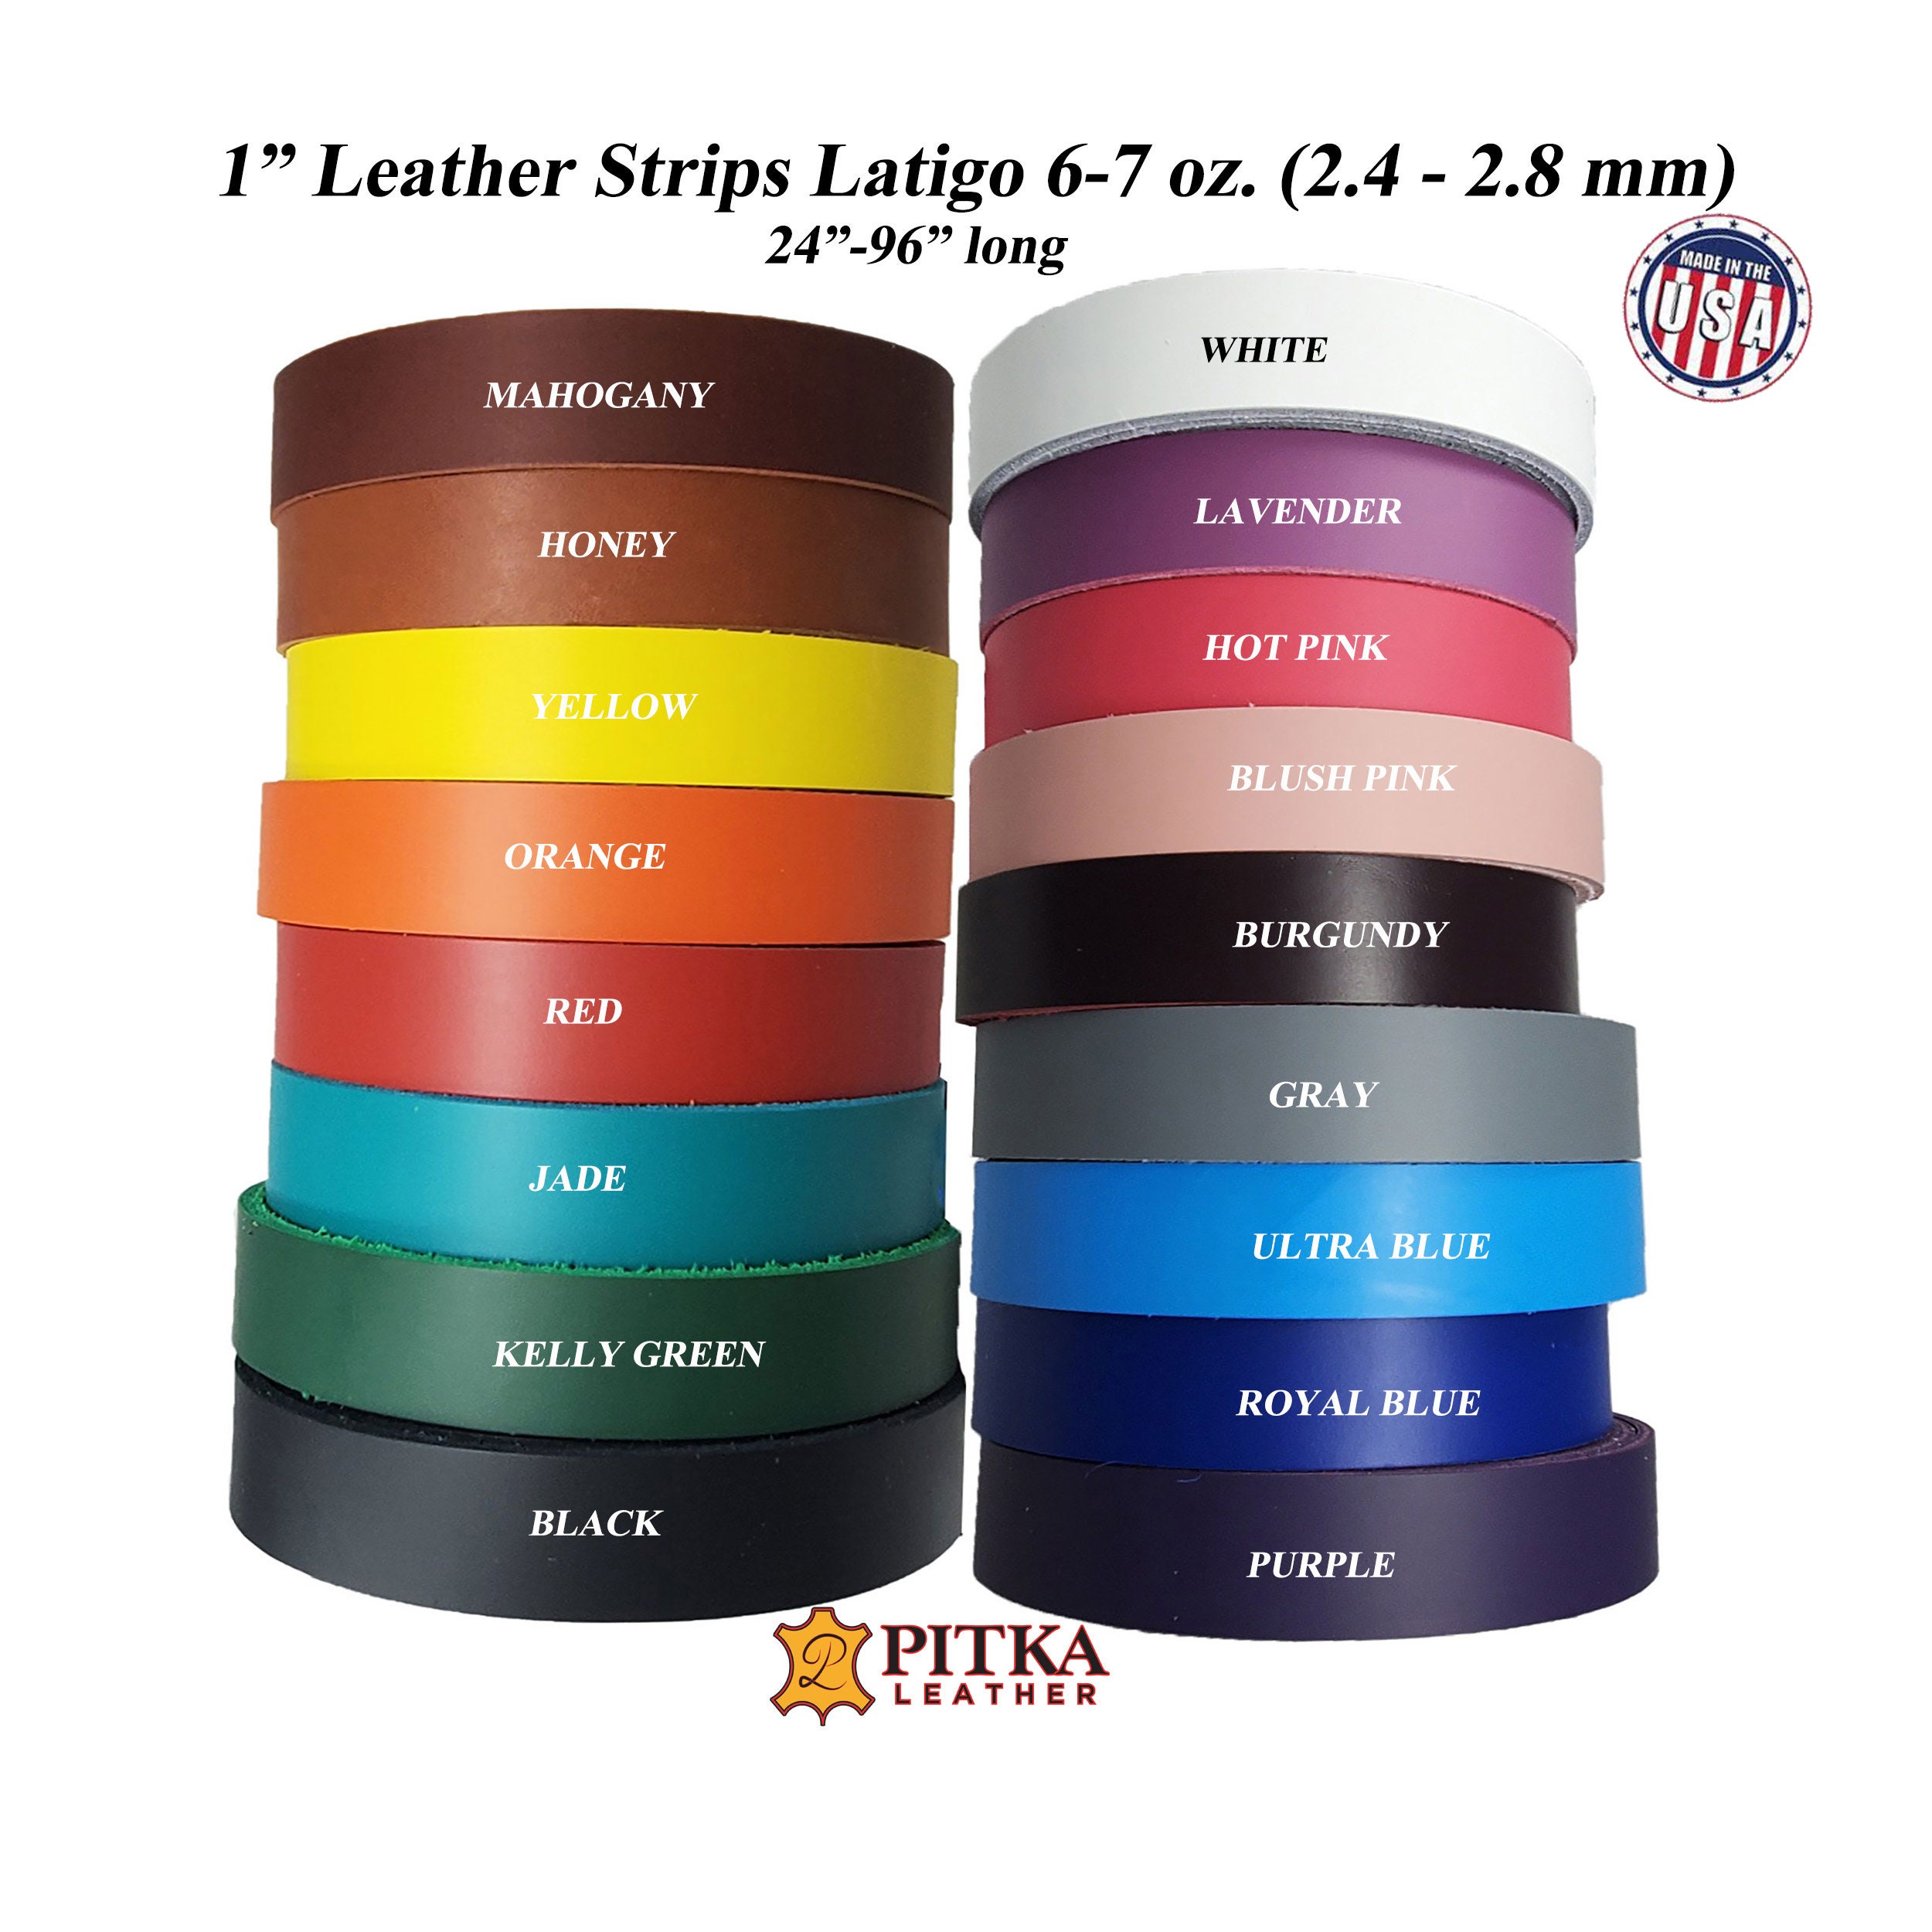 1 x 60 Leather Strip for Crafting or DIY Projects – RAWHYD